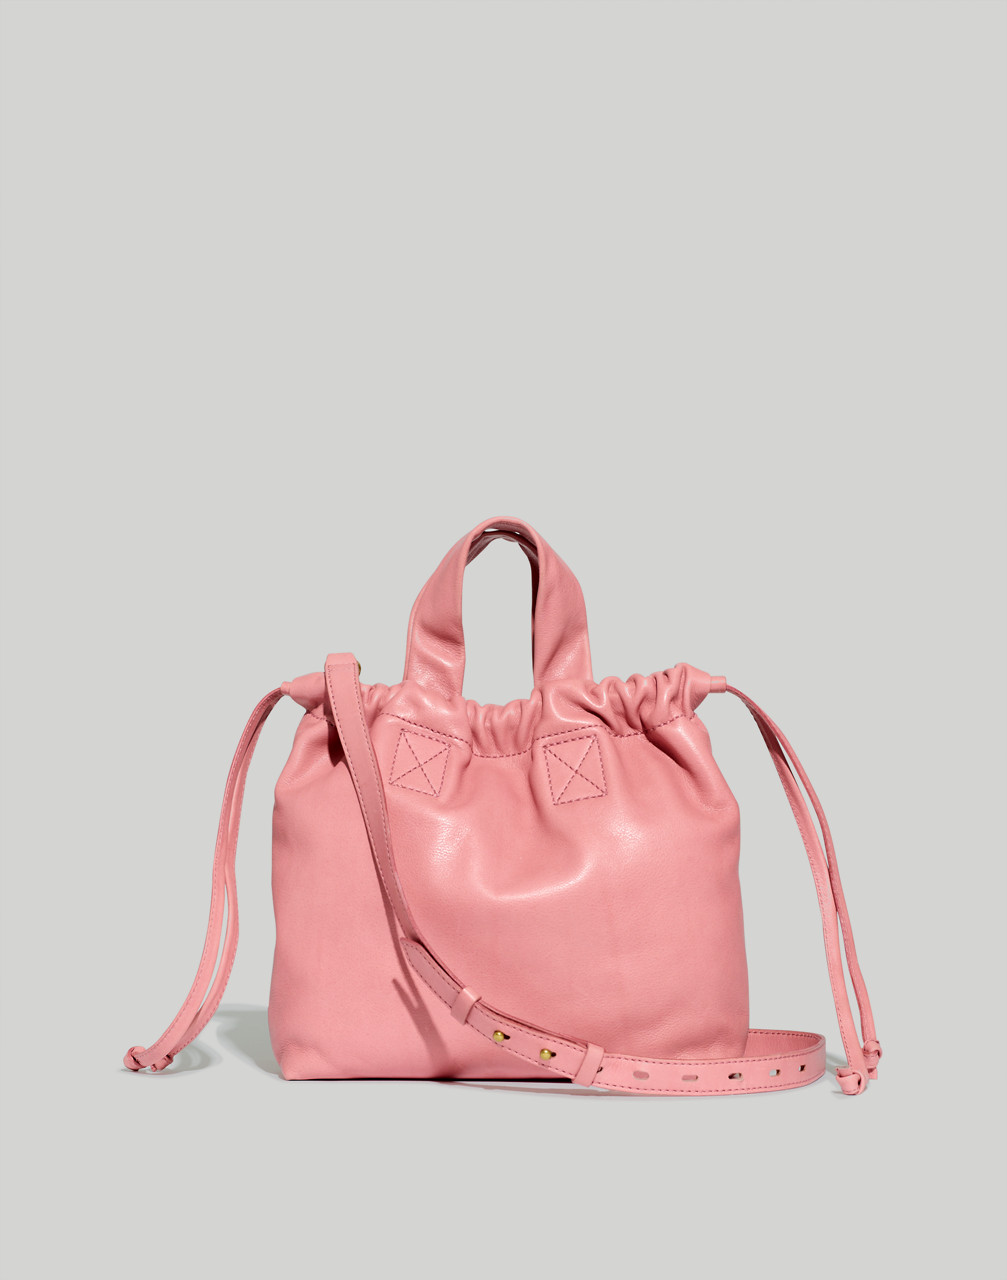 Mw The Piazza Crossbody Bag In Misty Rose